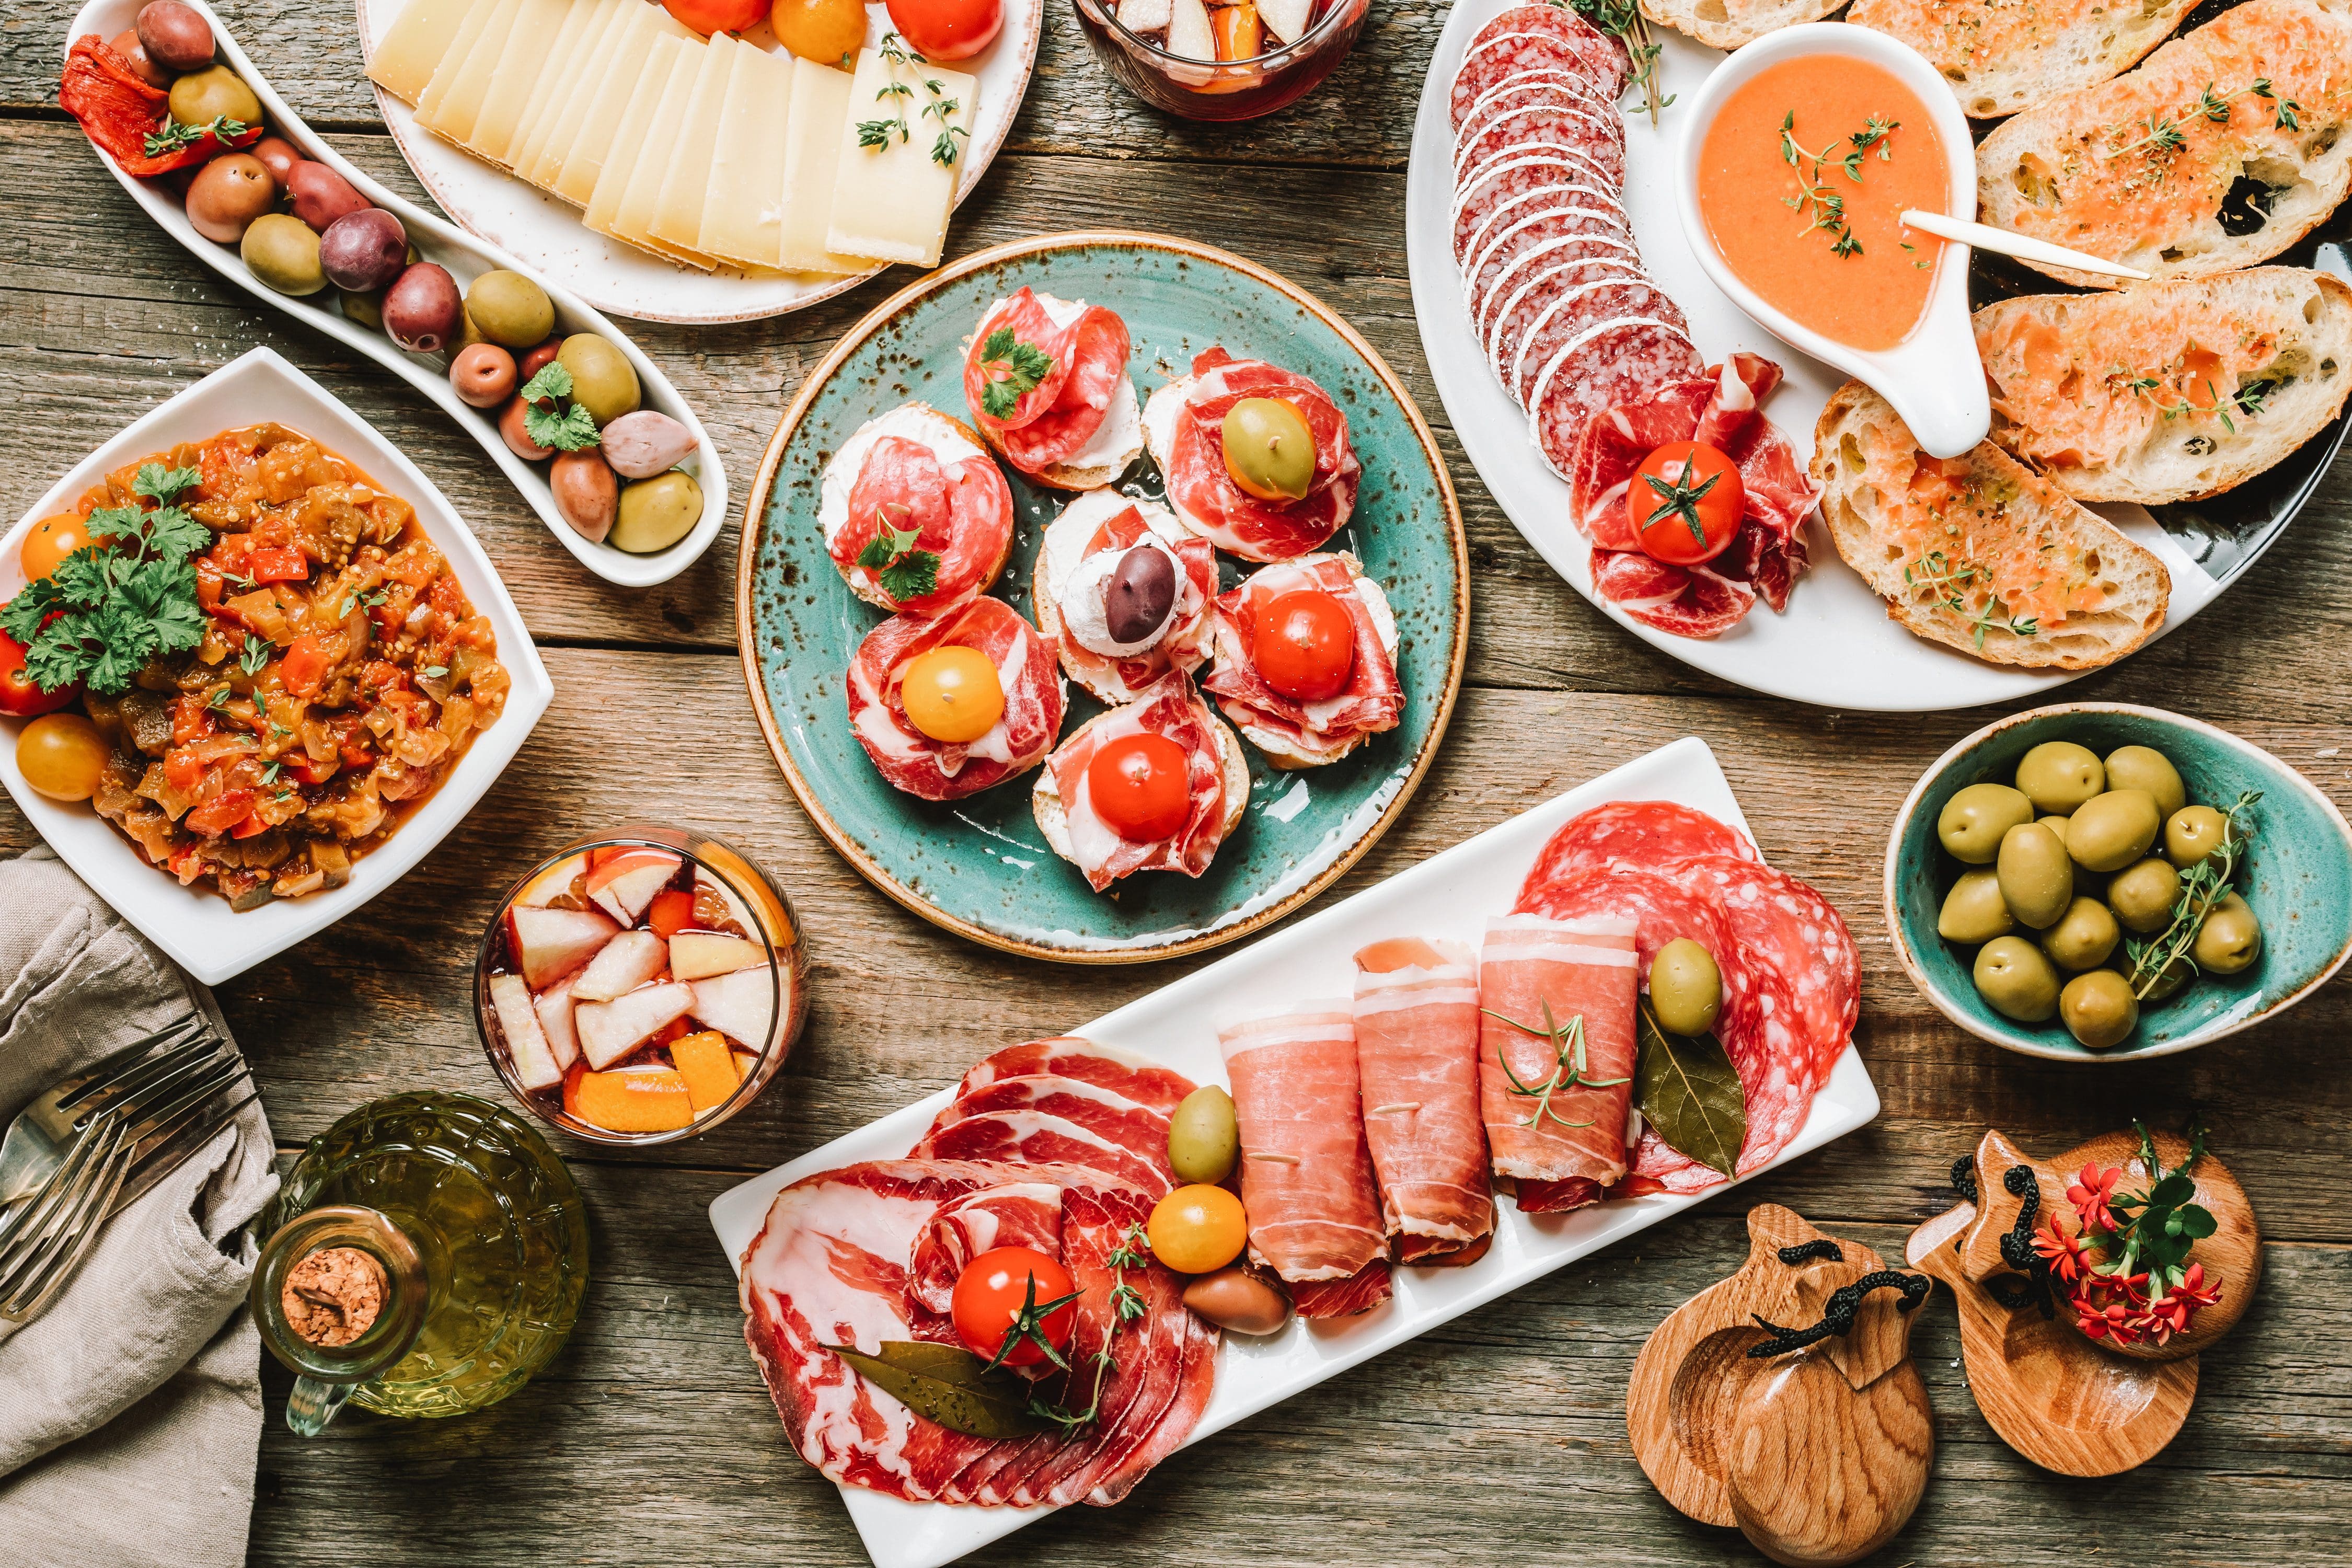 Overhead view of a table full of tapas dishes, from plump green olives to cured meats, cheeses, pan con tomate and olive oil